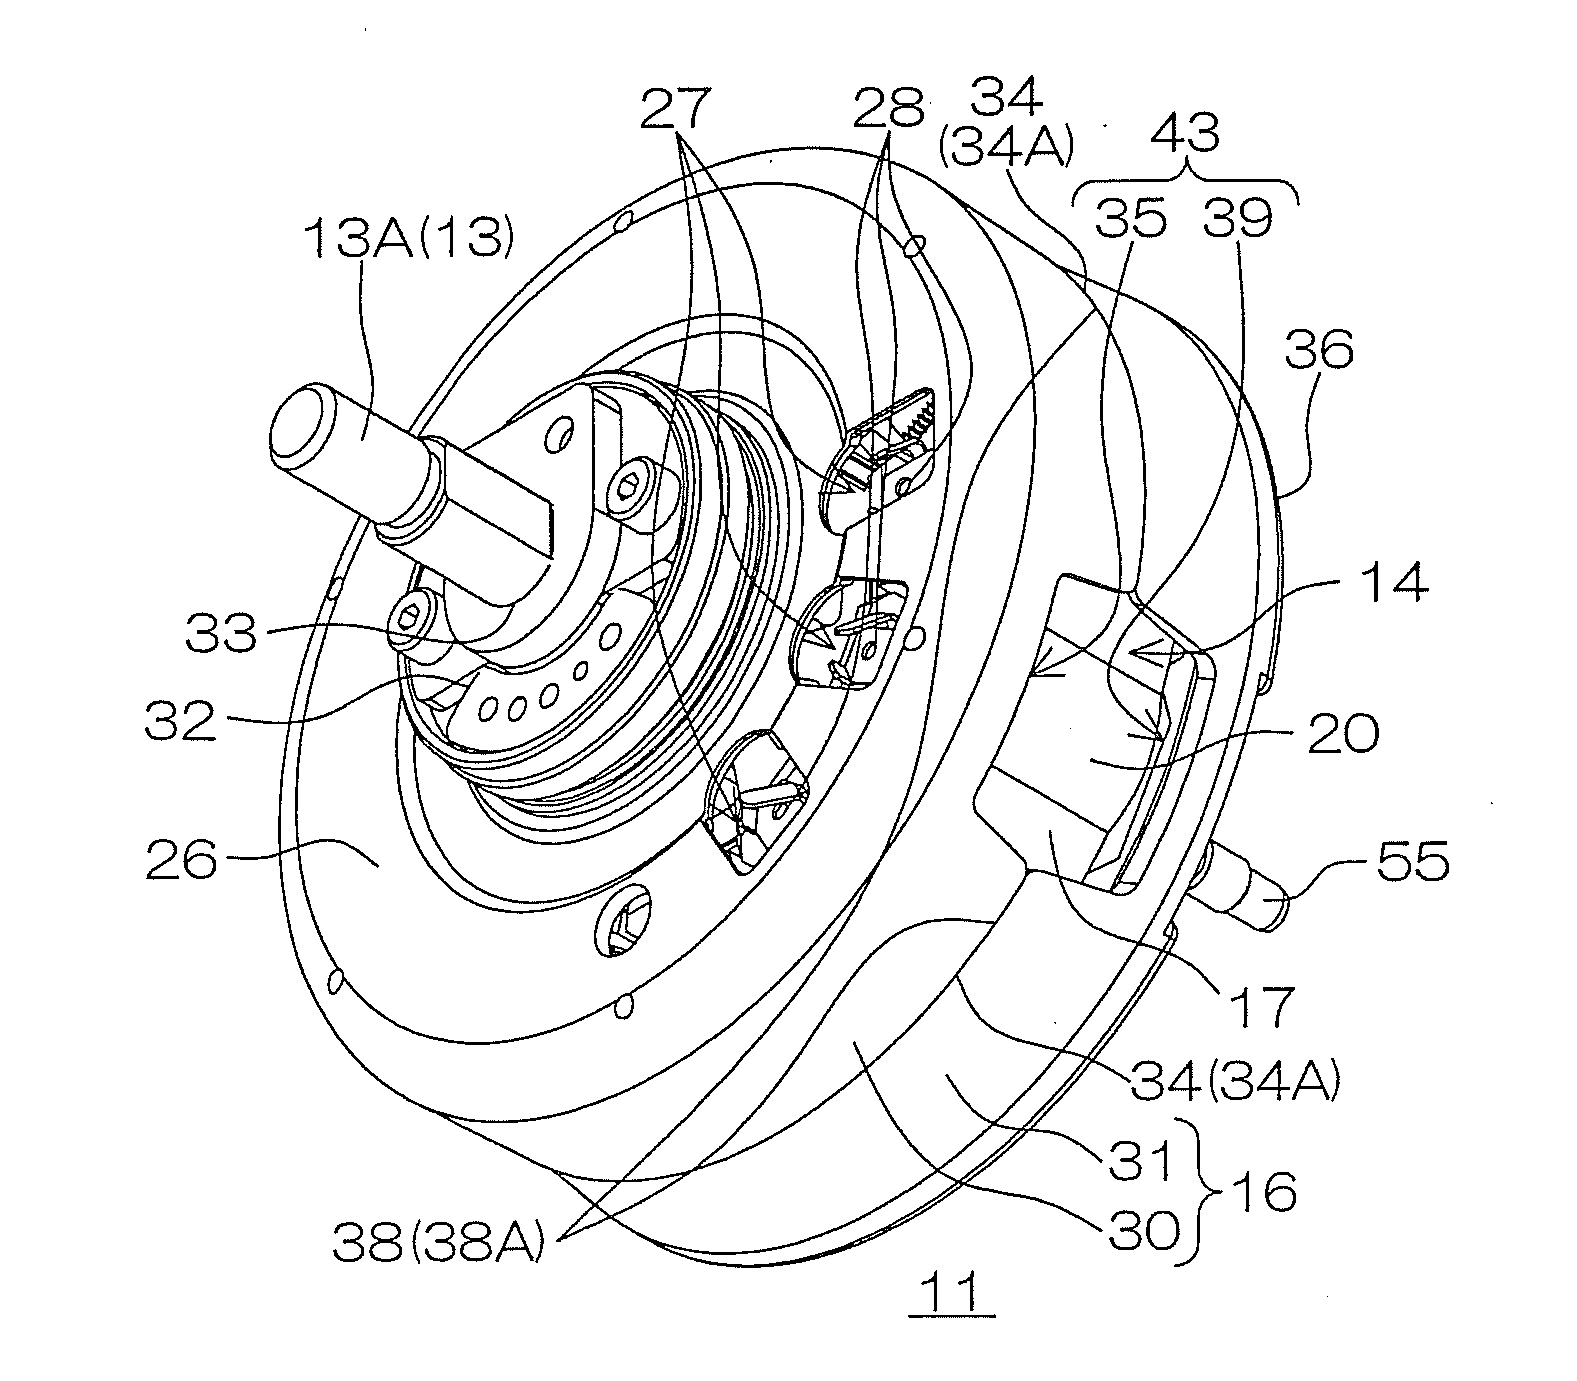 Direct-current motor and hub unit